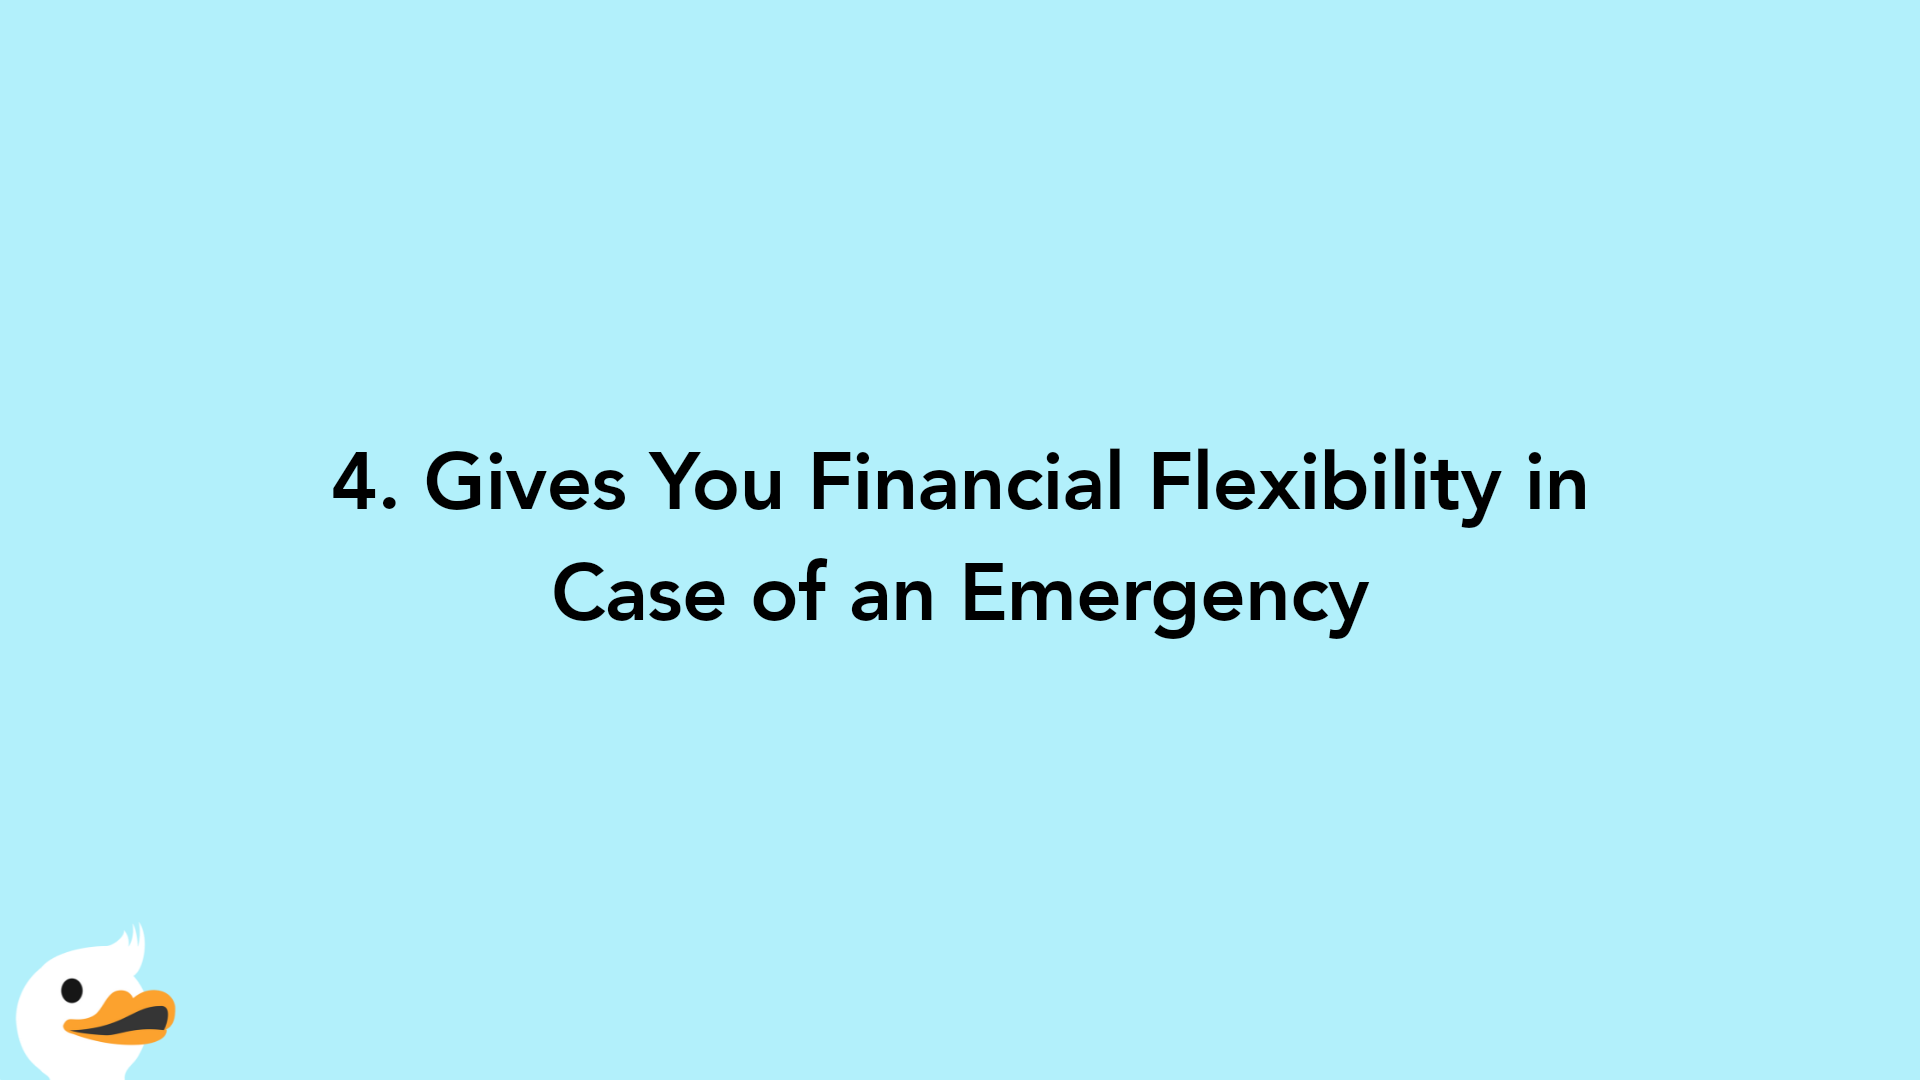 4. Gives You Financial Flexibility in Case of an Emergency